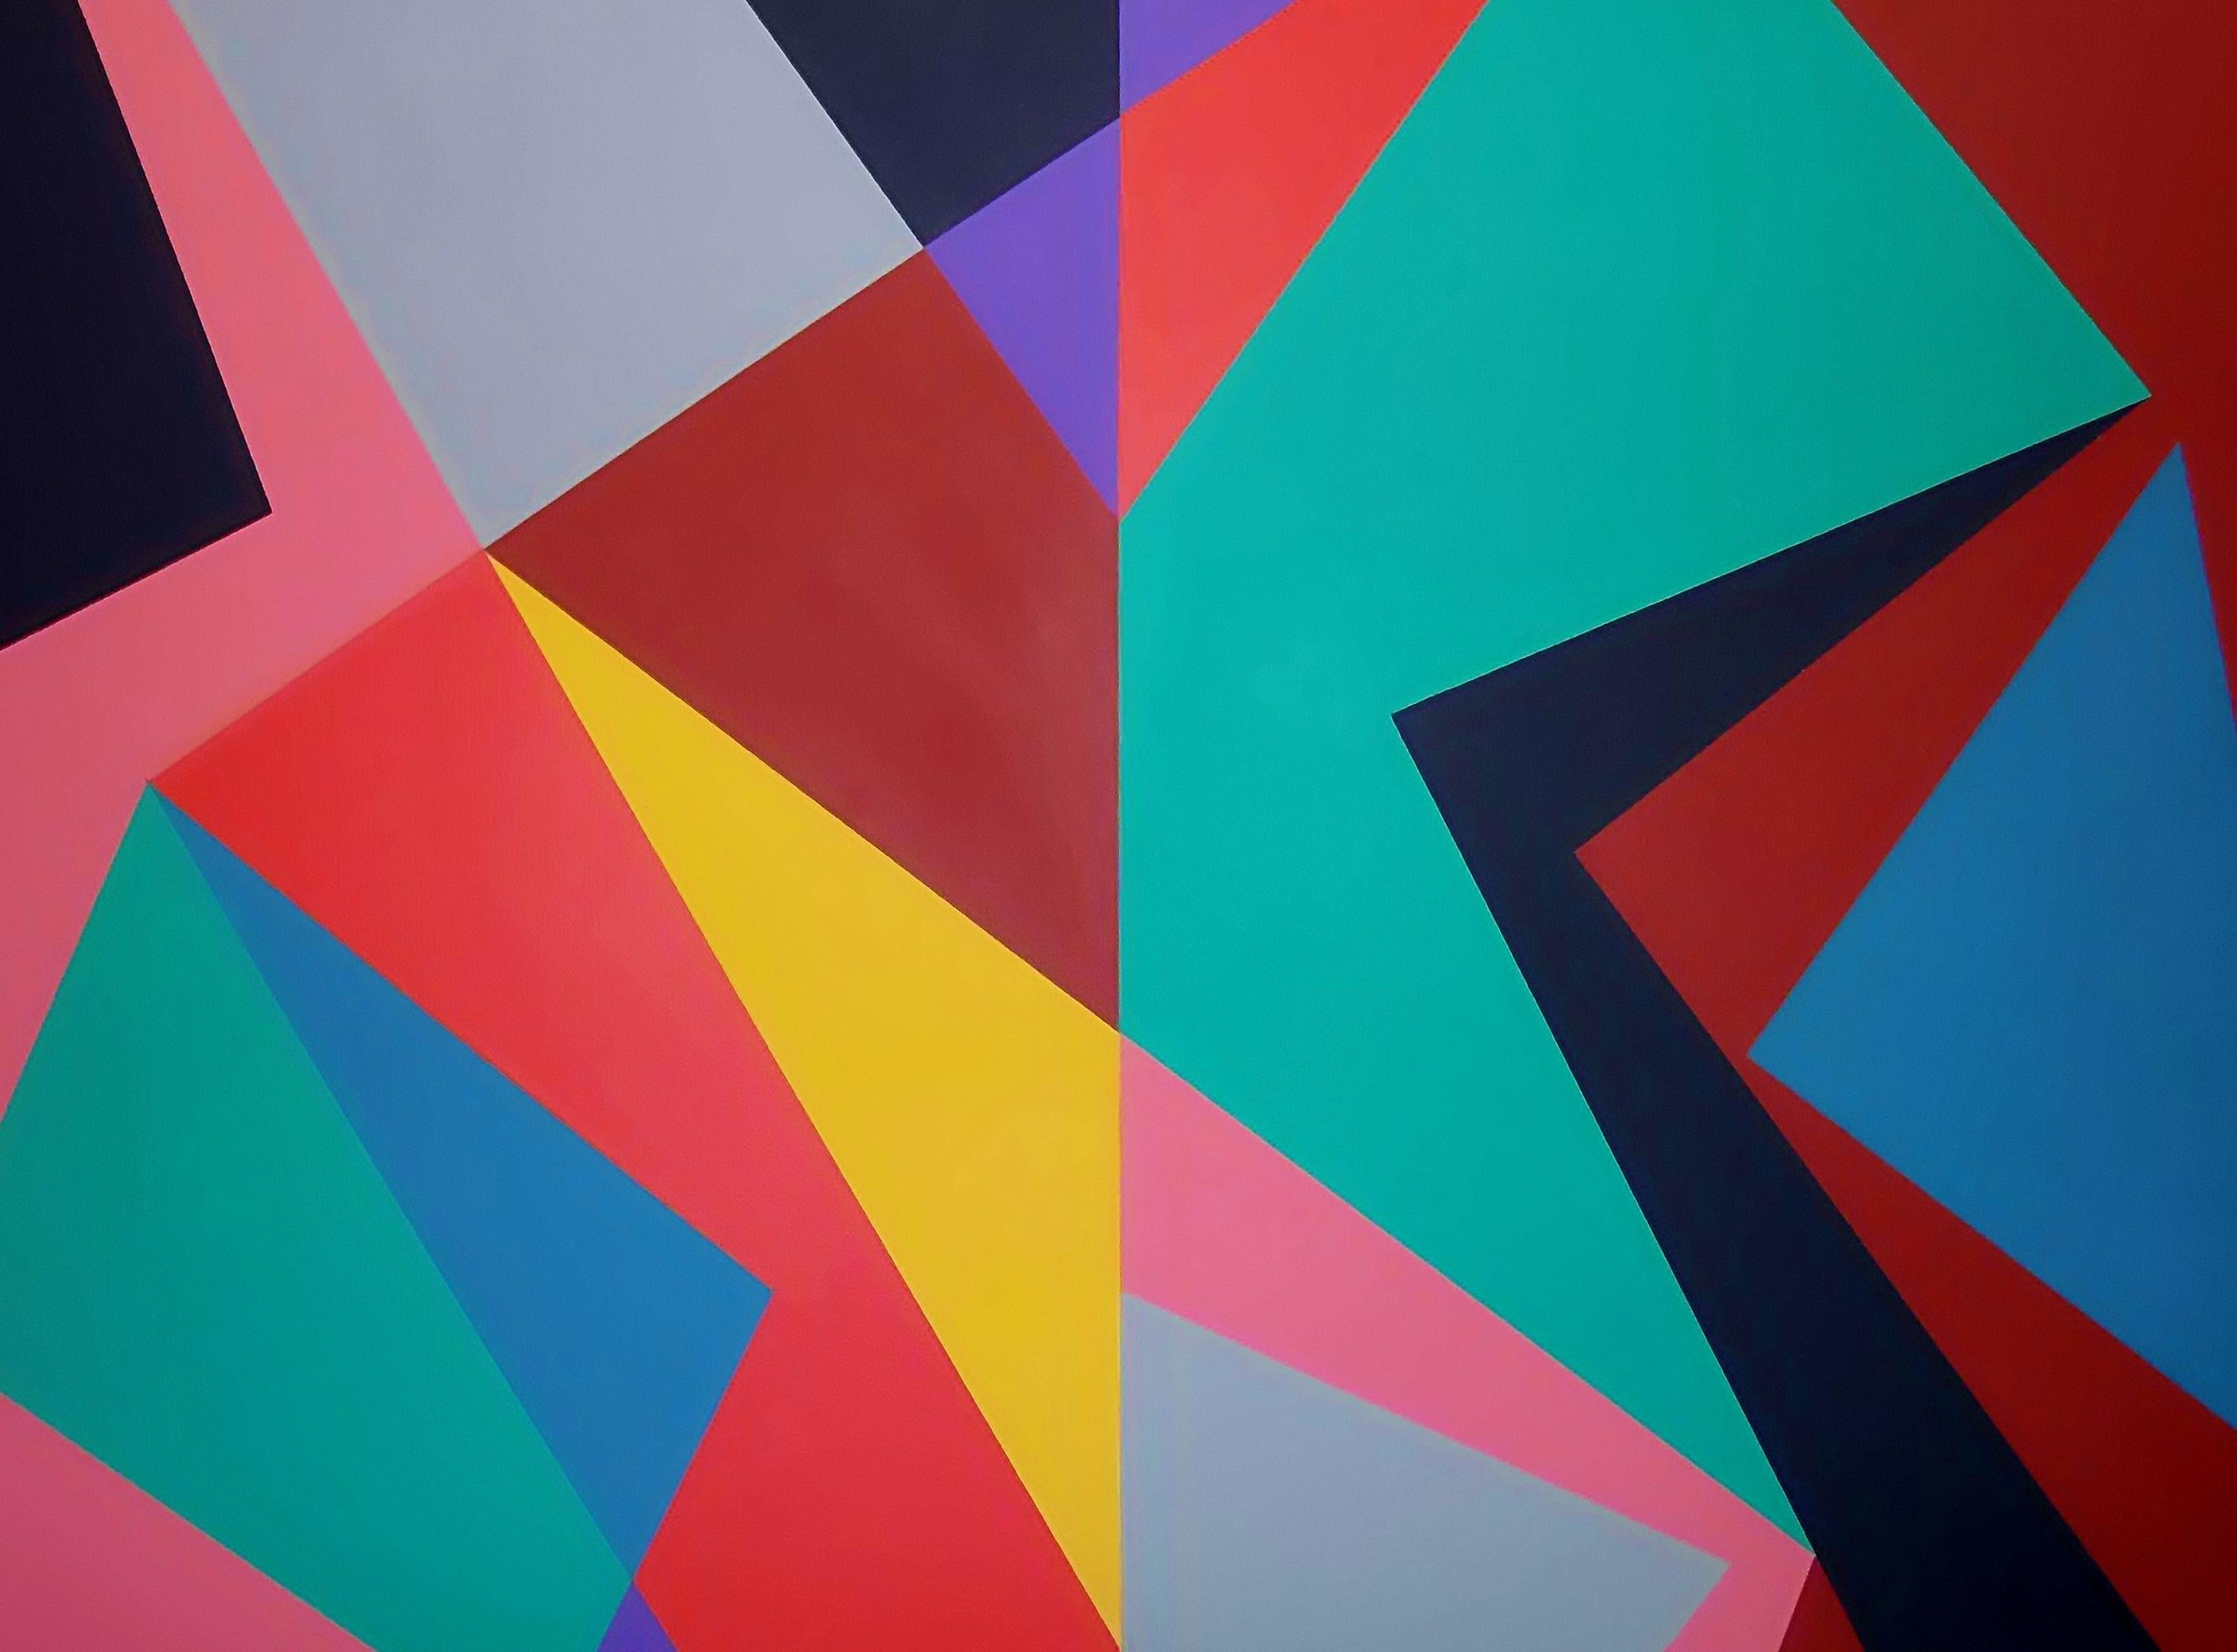 Lanzamiento/ ComposiciÃ³n Concreta 6, 2017 (Release/Concrete Composition 6, 2017)  New Contemporary Geometric Minimalism.  Line, form and trapezoid planes of color are the building blocks of this painting. Geometric, Hard Edged and Concrete. Light